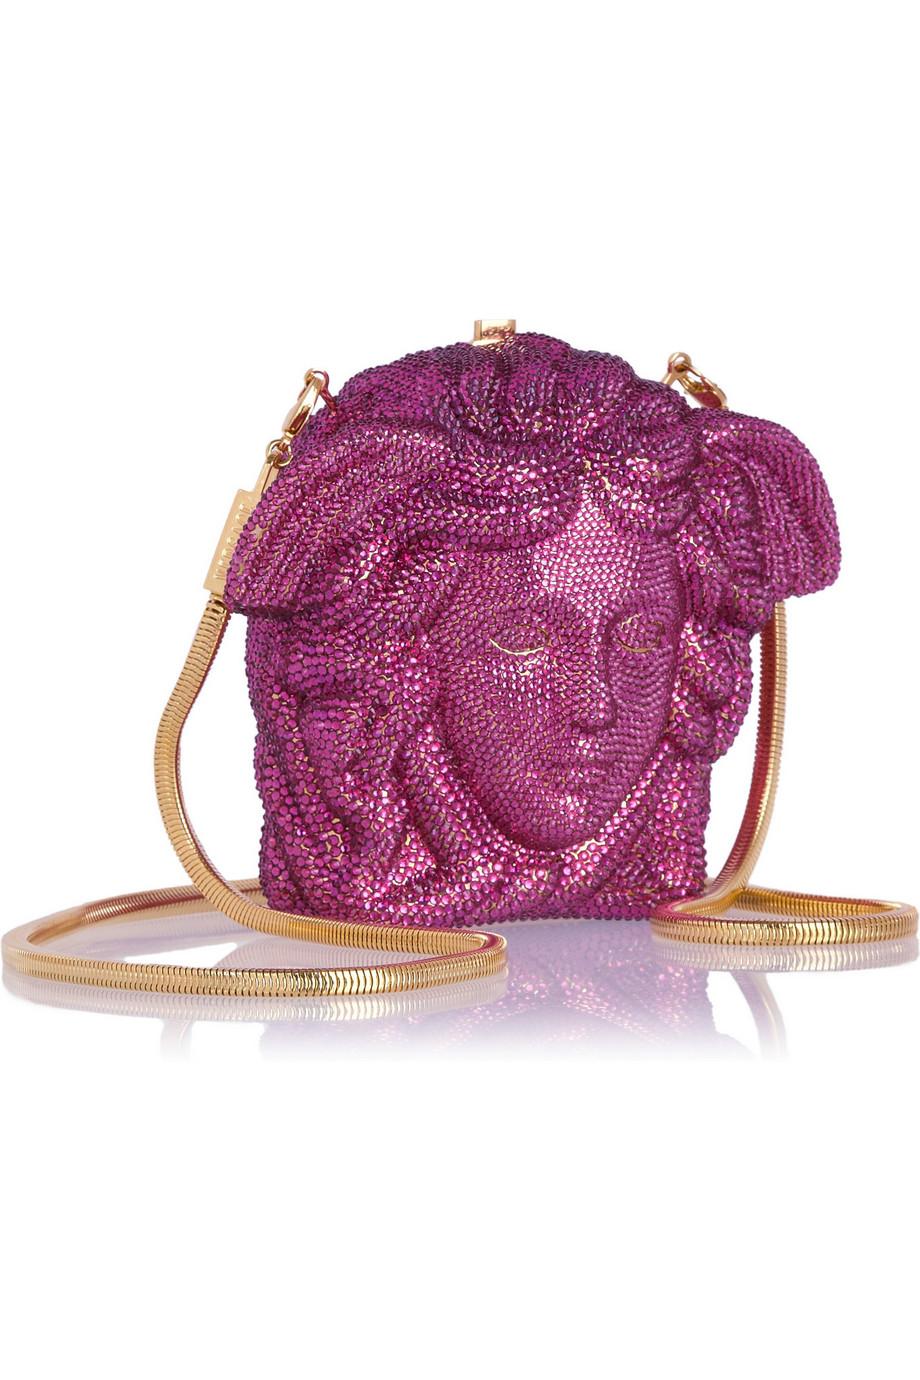 Embellished with hundreds of magenta crystals, Versace's iconic 'Medusa' motif has been re-imagined as a sparkling shoulder bag. This Italian-made design is the perfect size for keeping your lipstick, keys and card close at hand and features